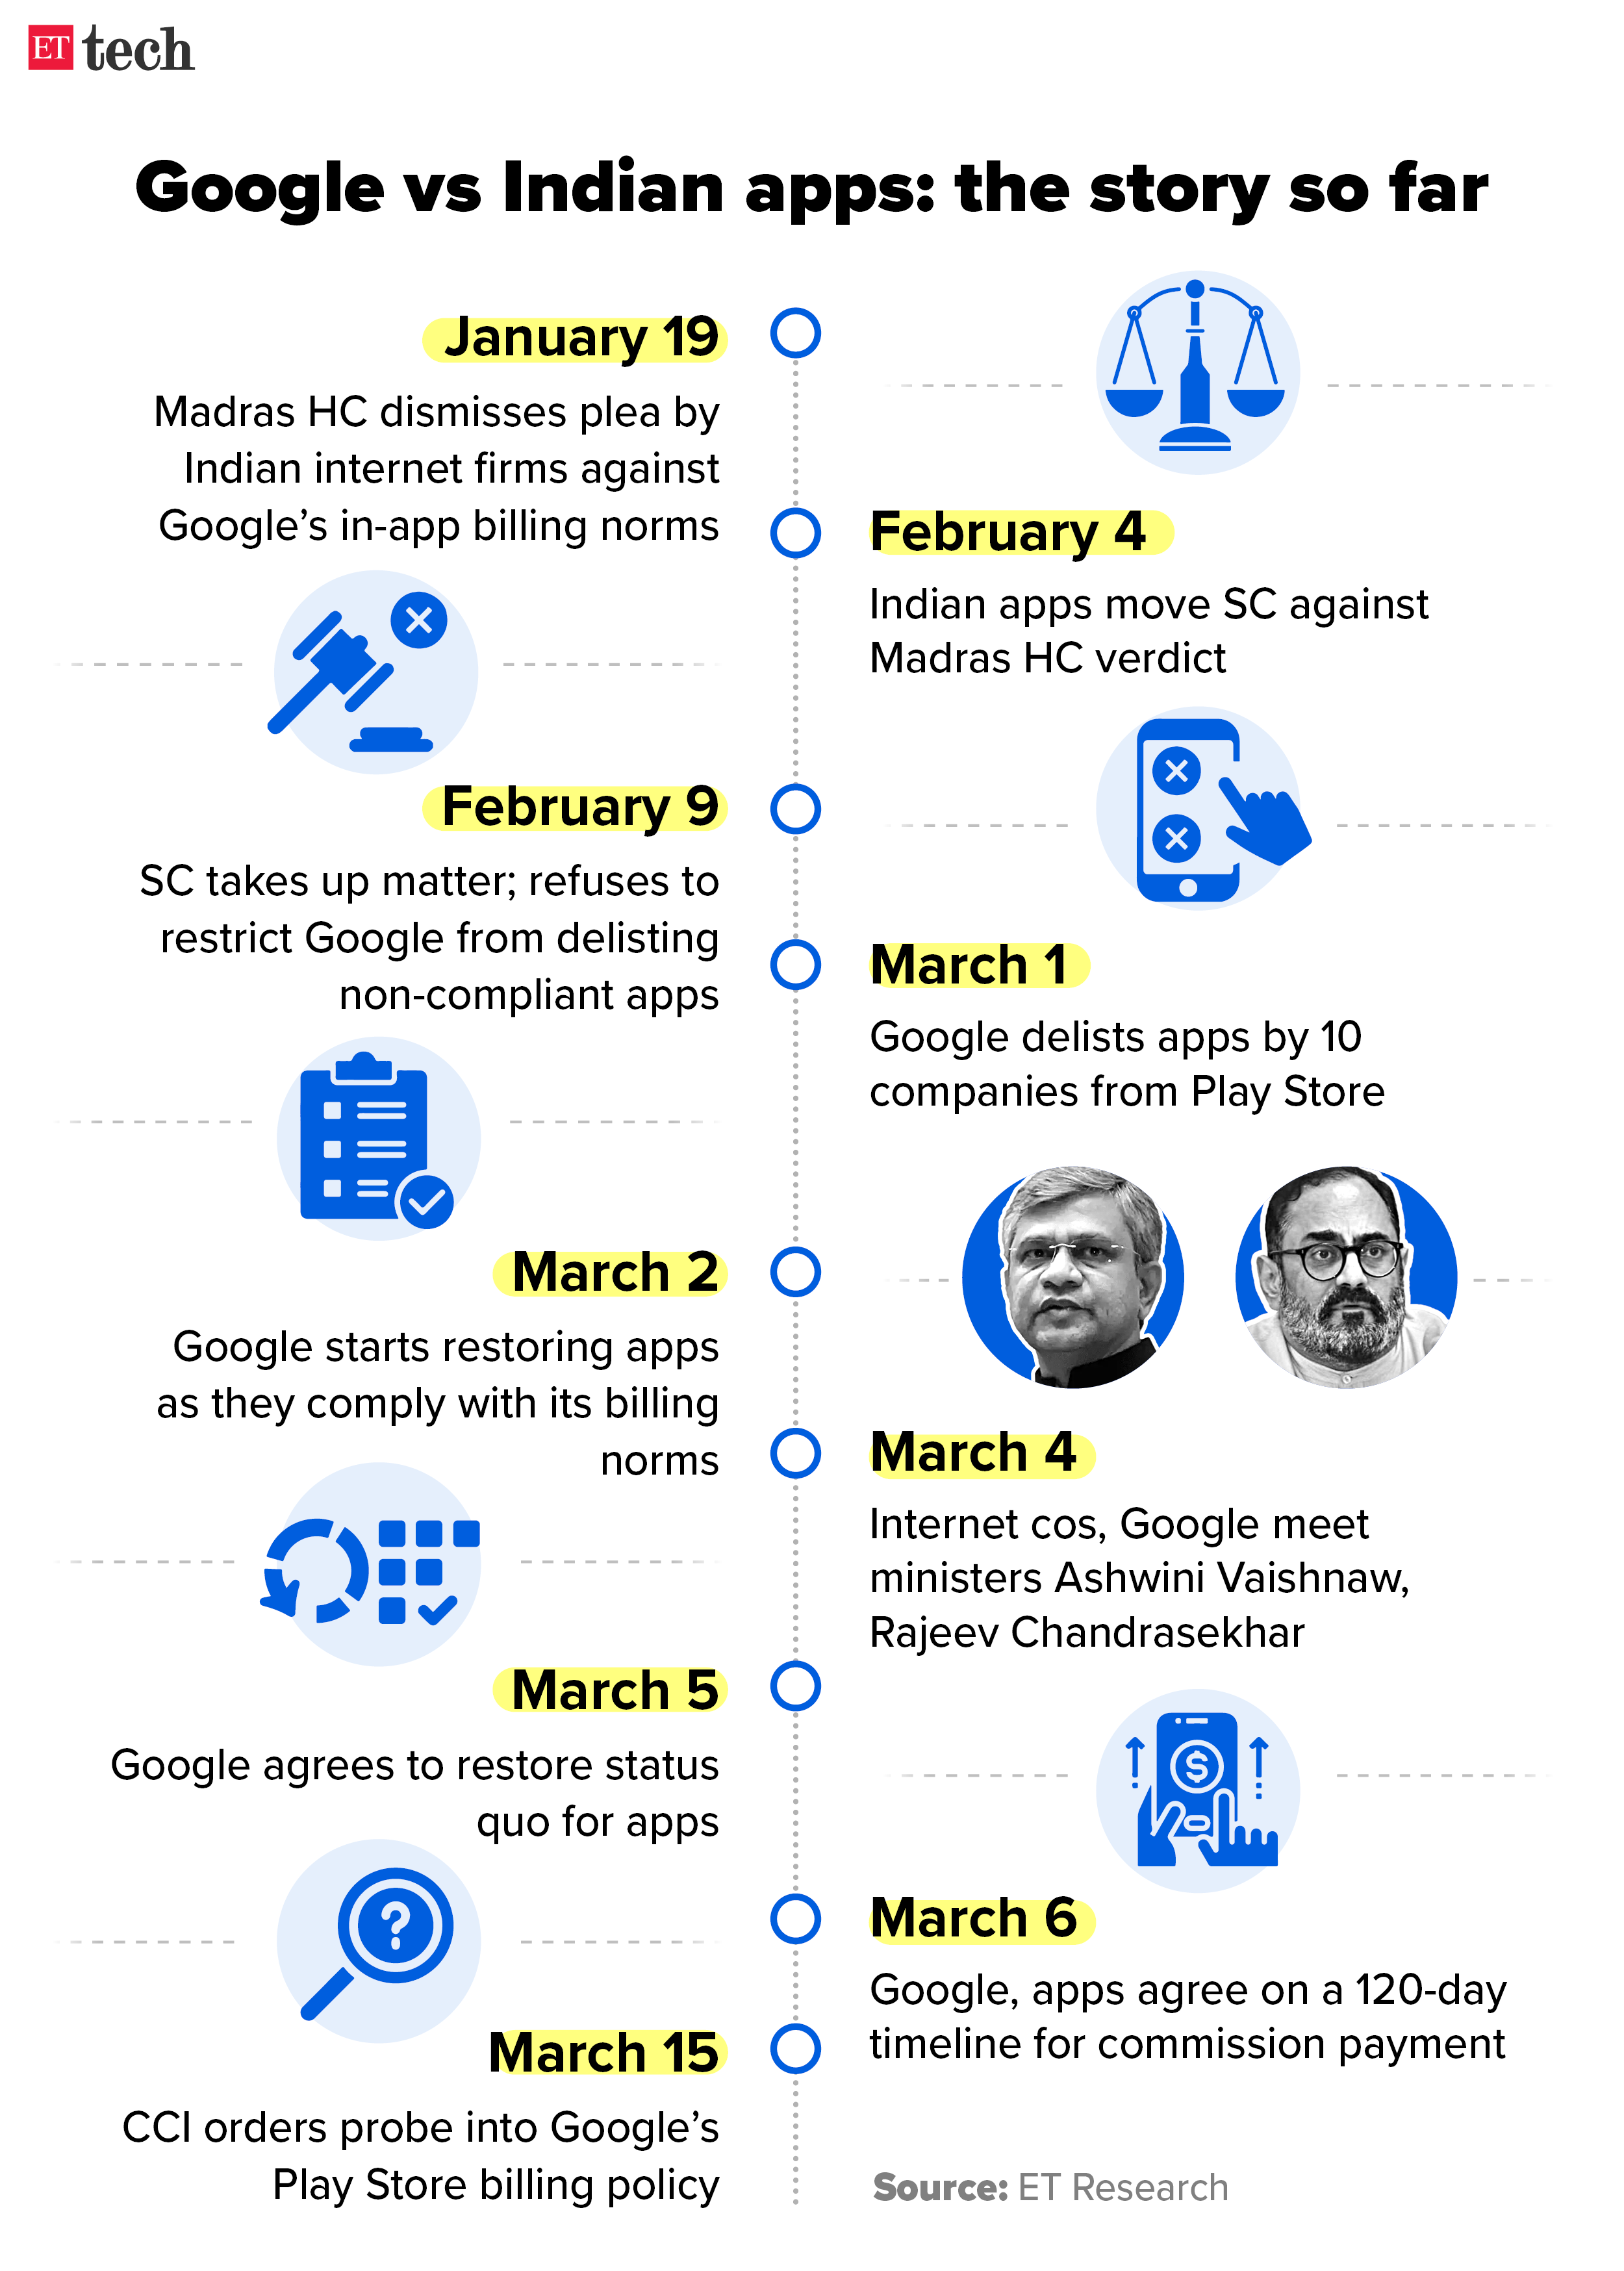 Google vs Indian apps the story so